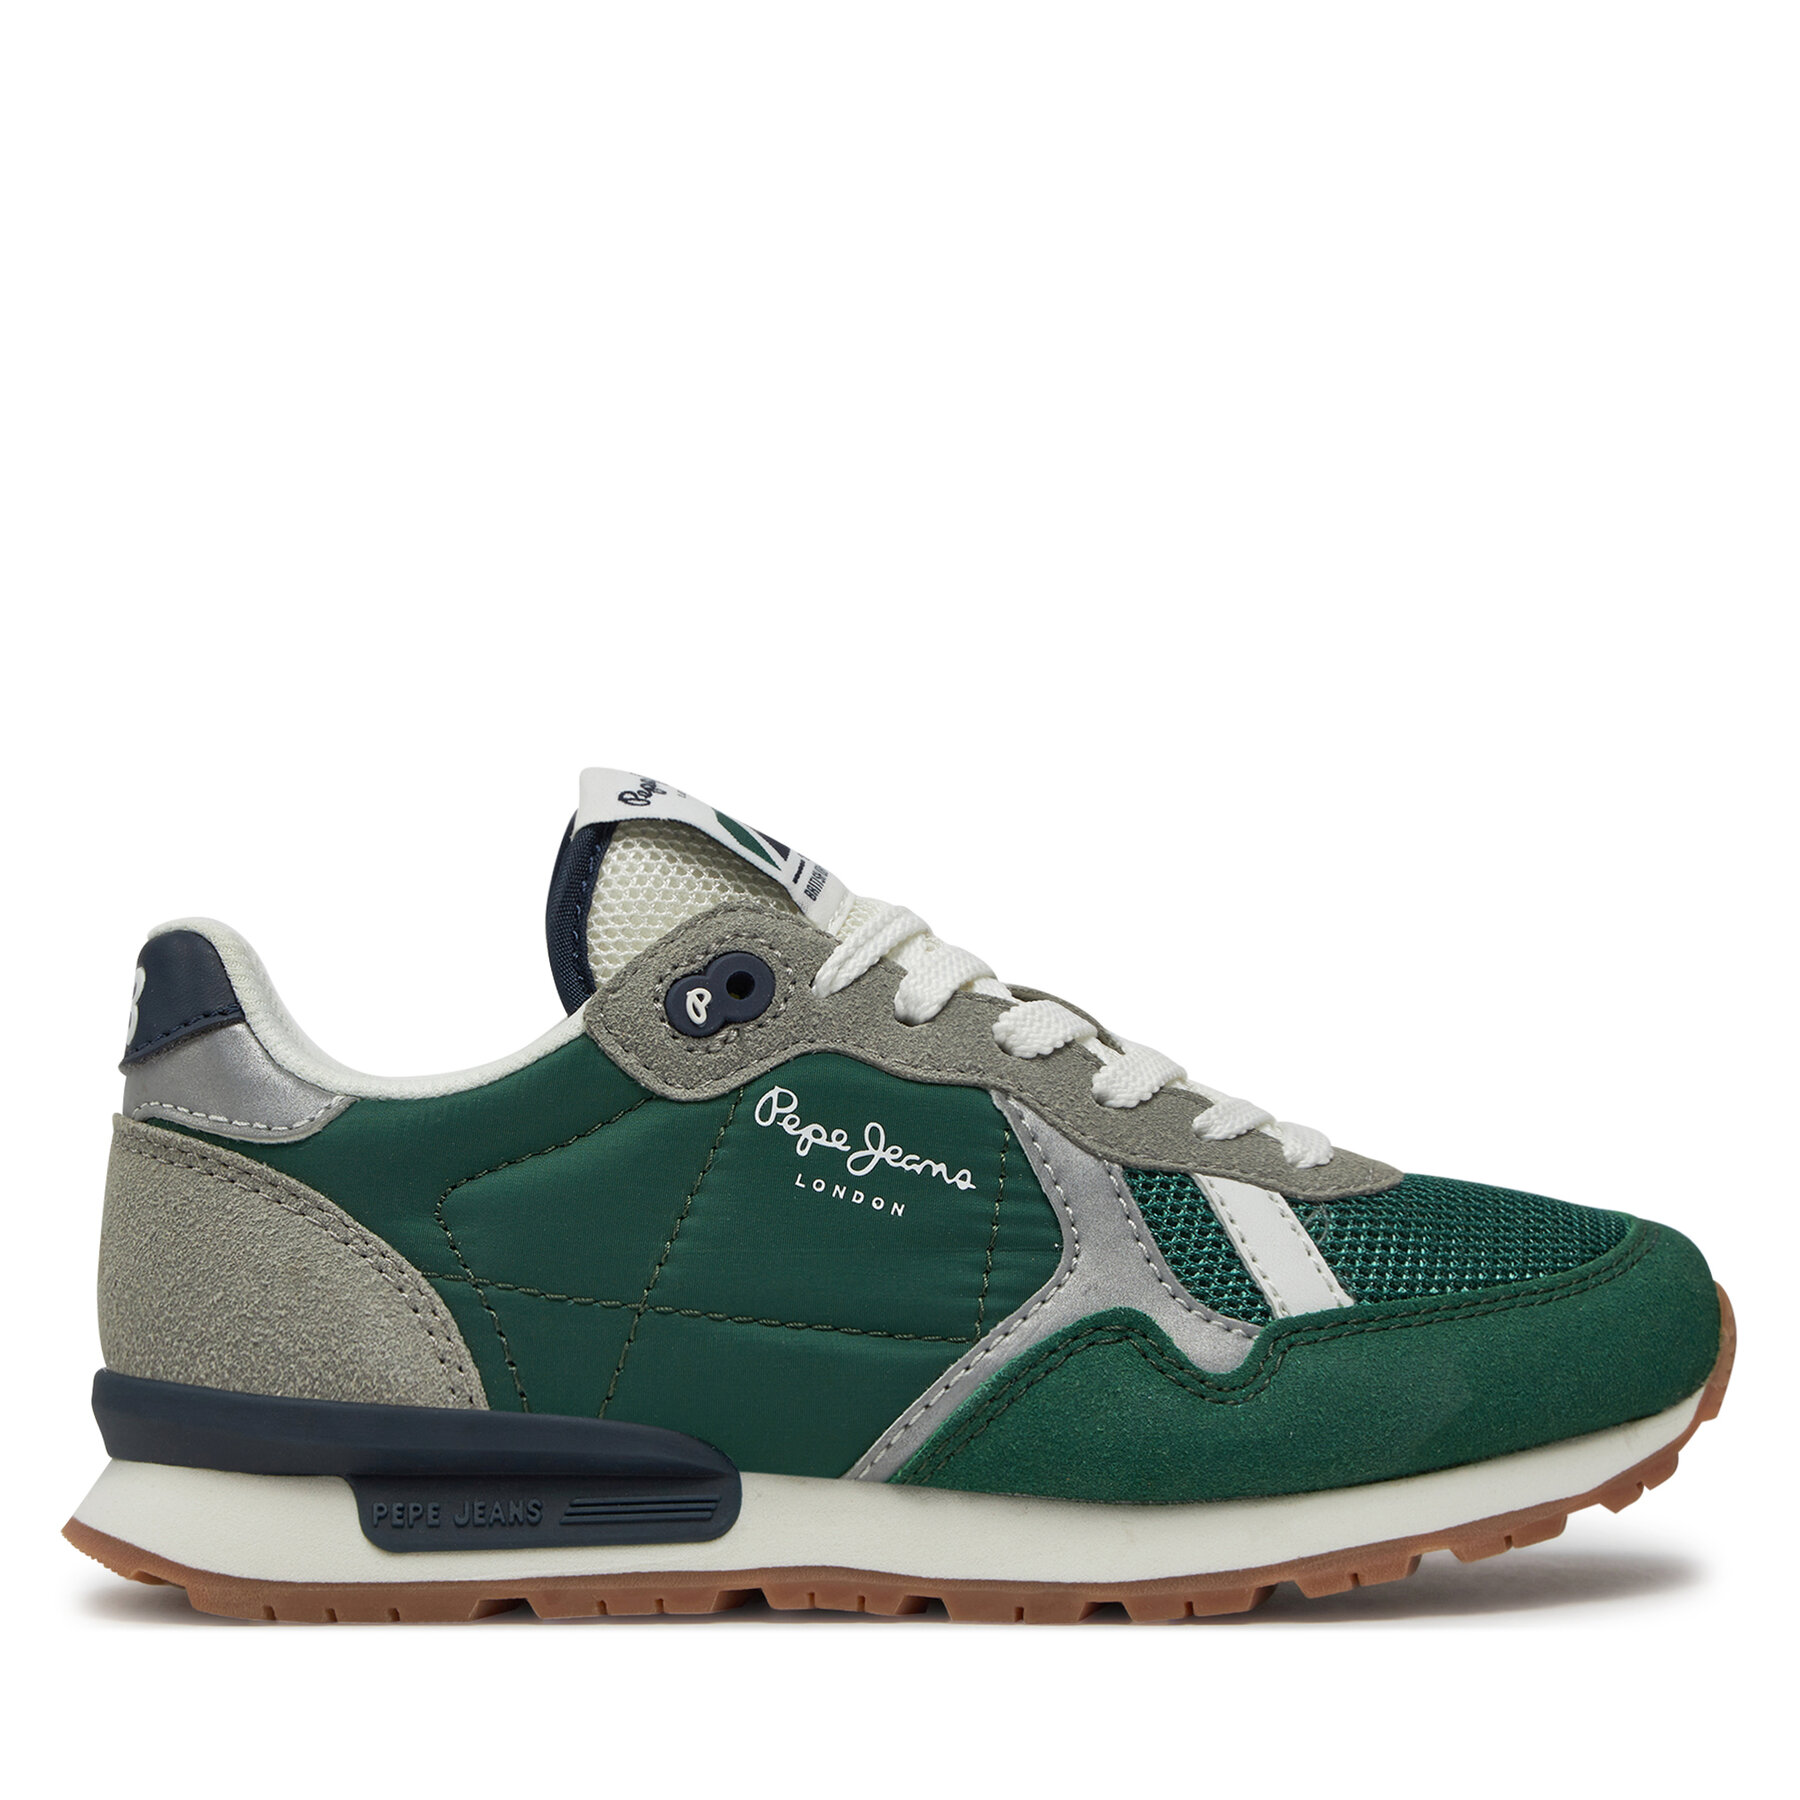 Sneakers Pepe Jeans Brit Young B PBS40003 Grün von Pepe Jeans